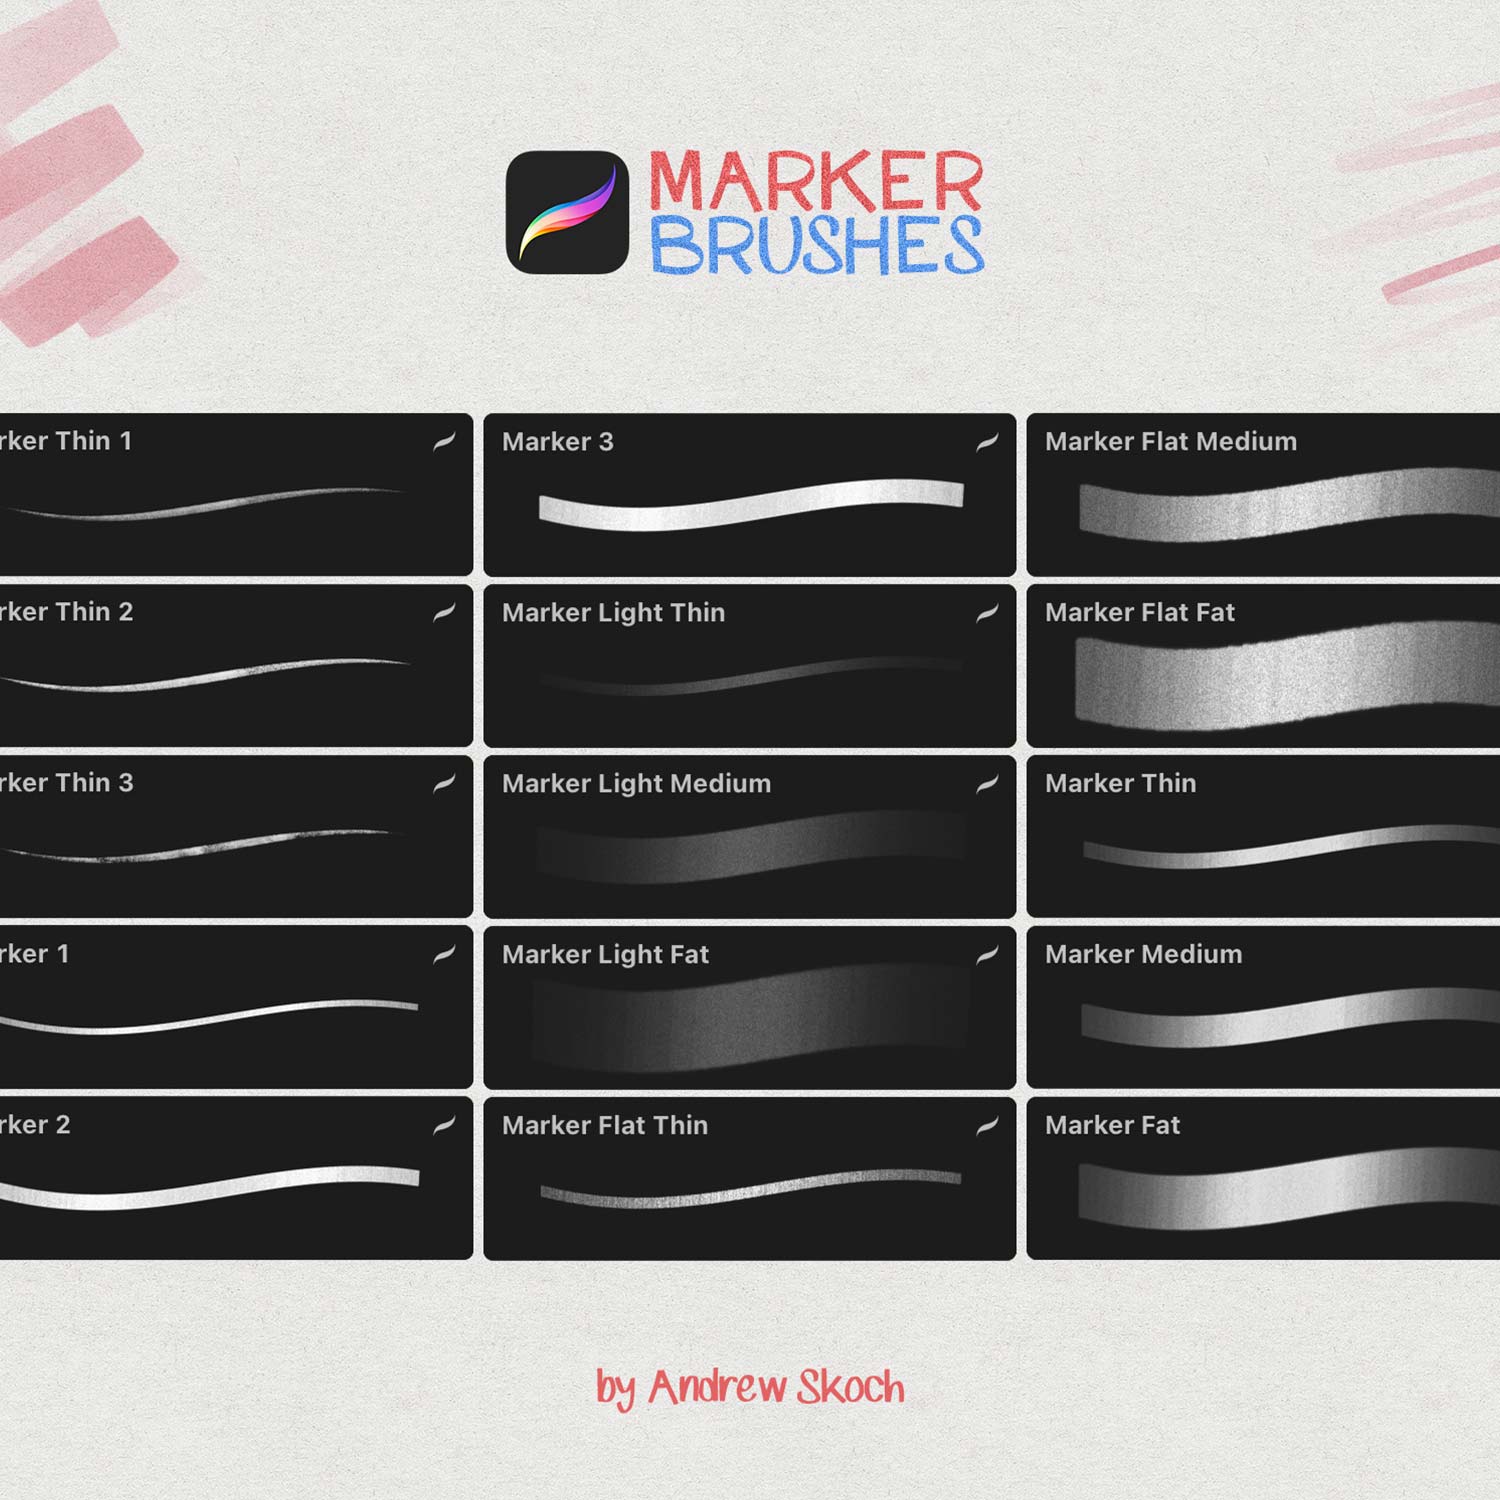 Marker Procreate Brushes preview image.